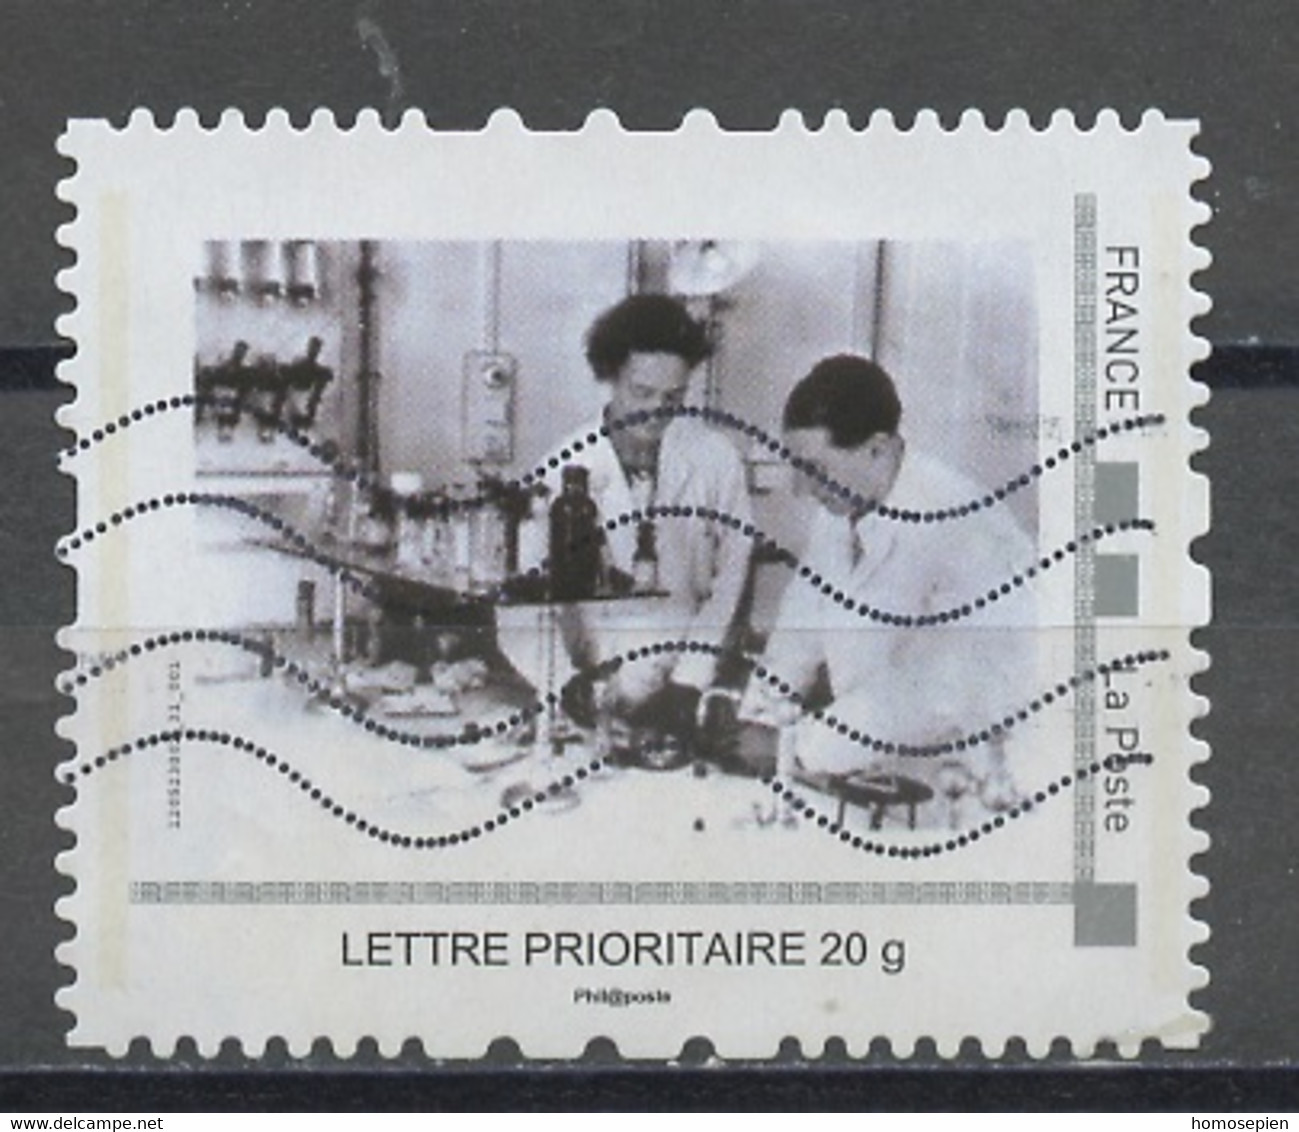 France - Frankreich Timbre Personnalisé 2007 Y&T N°MTAM01-010 - Michel N°BS(?) (o) - Chercheurs - Used Stamps